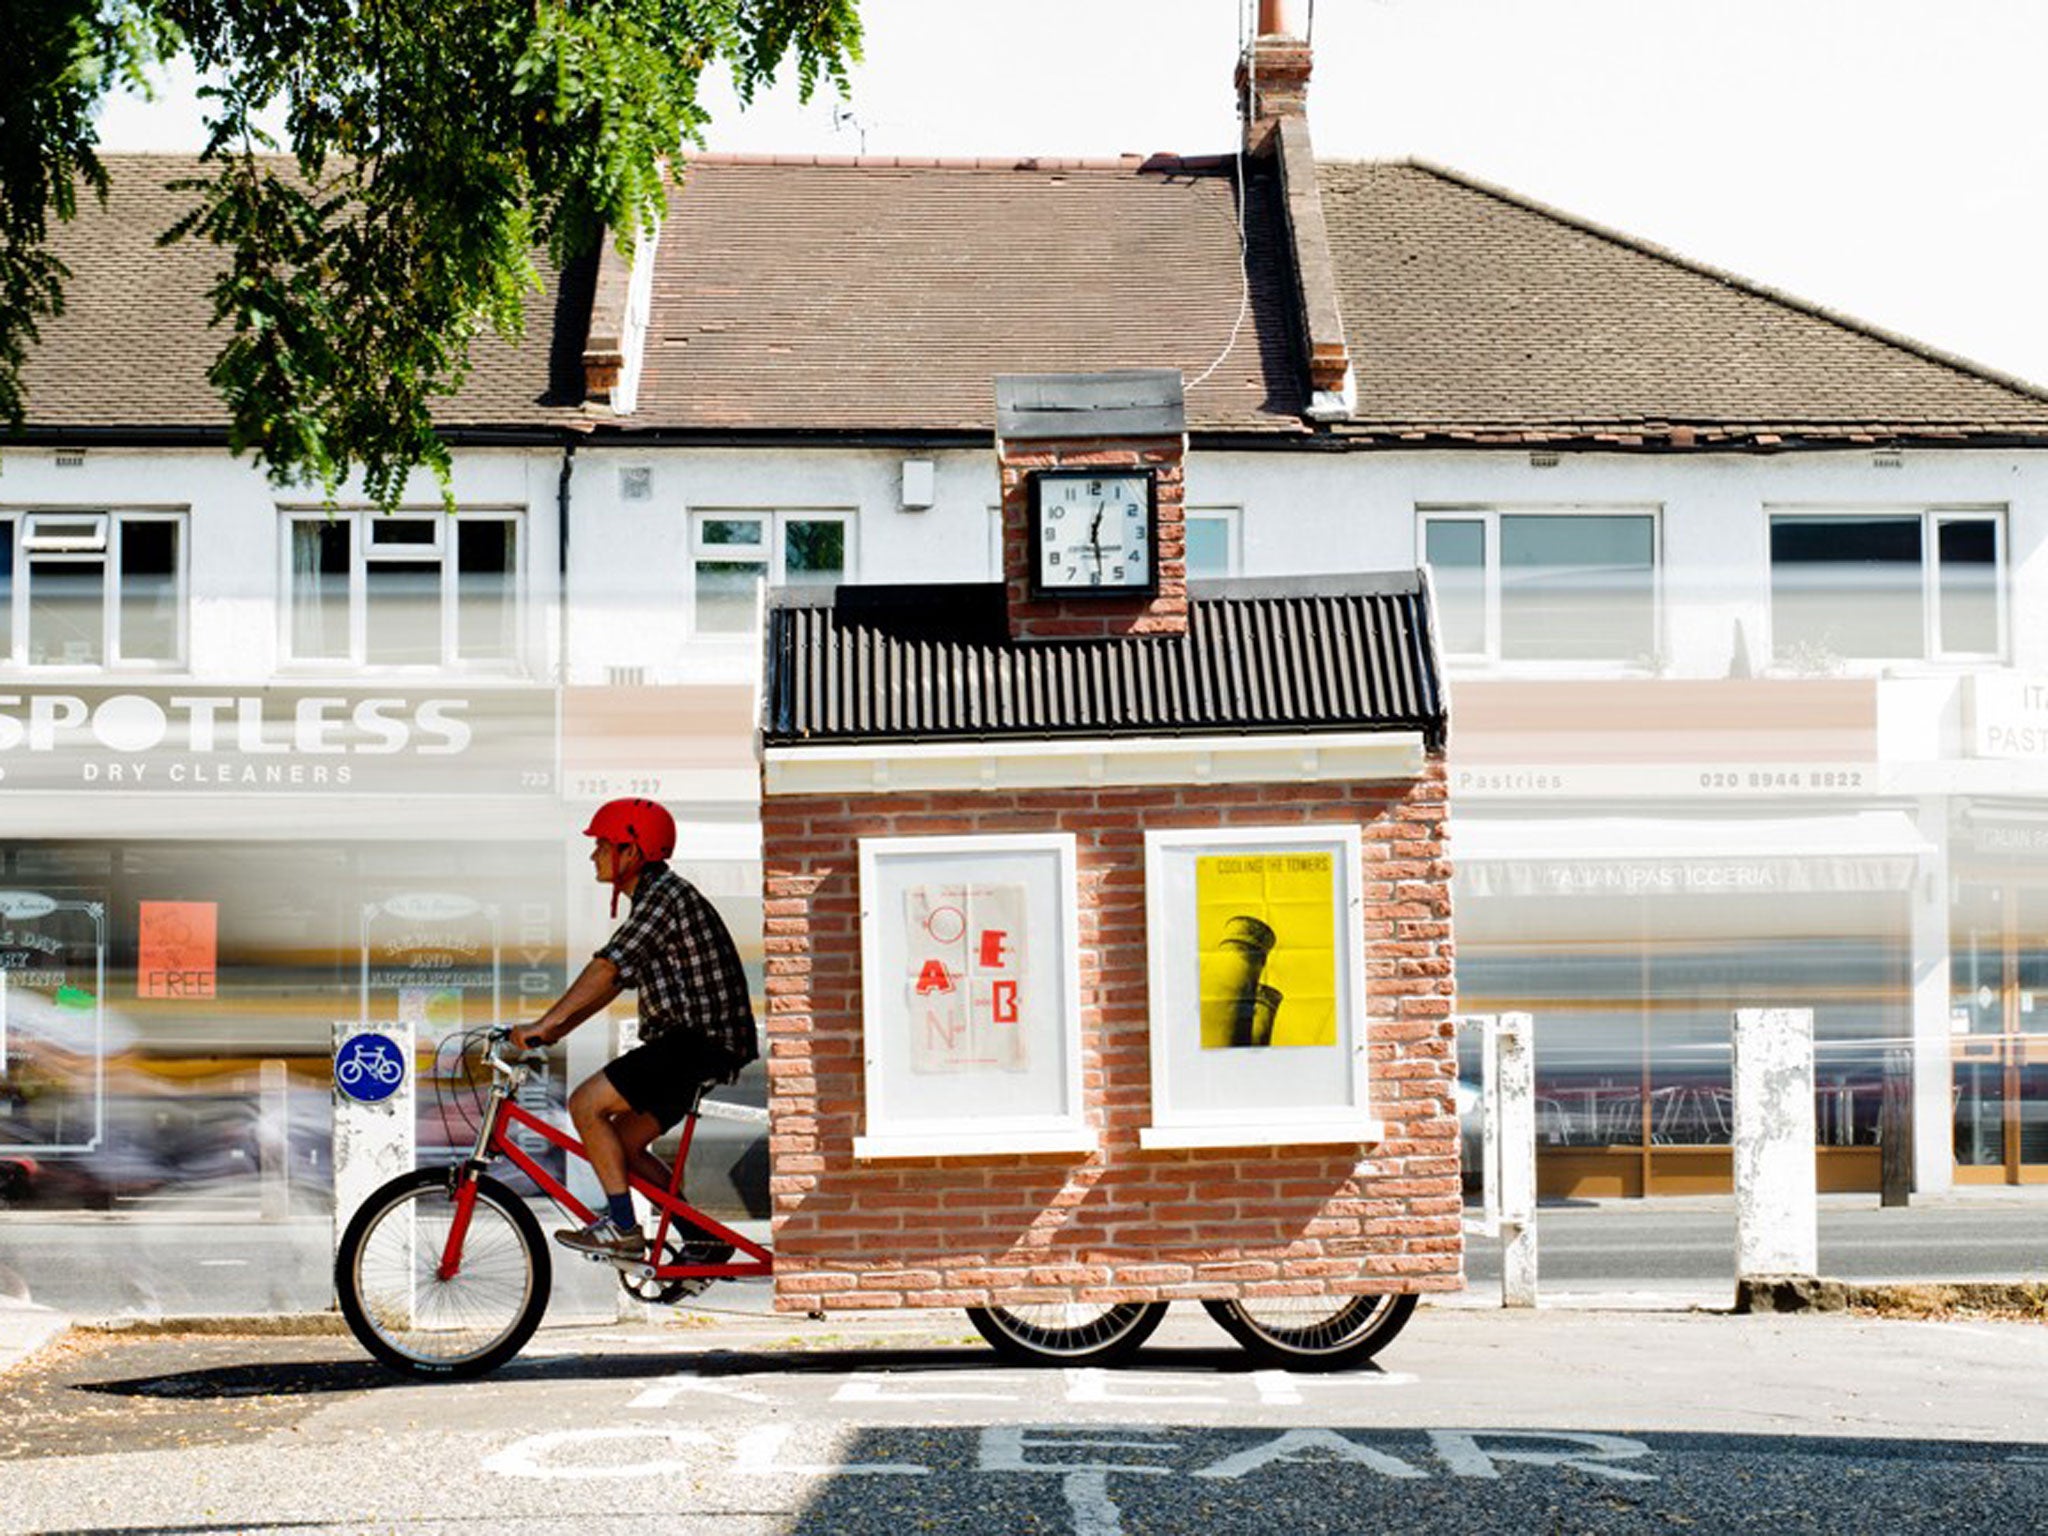 Cricklewood's mobile town square will visit five unloved parts of the London suburb